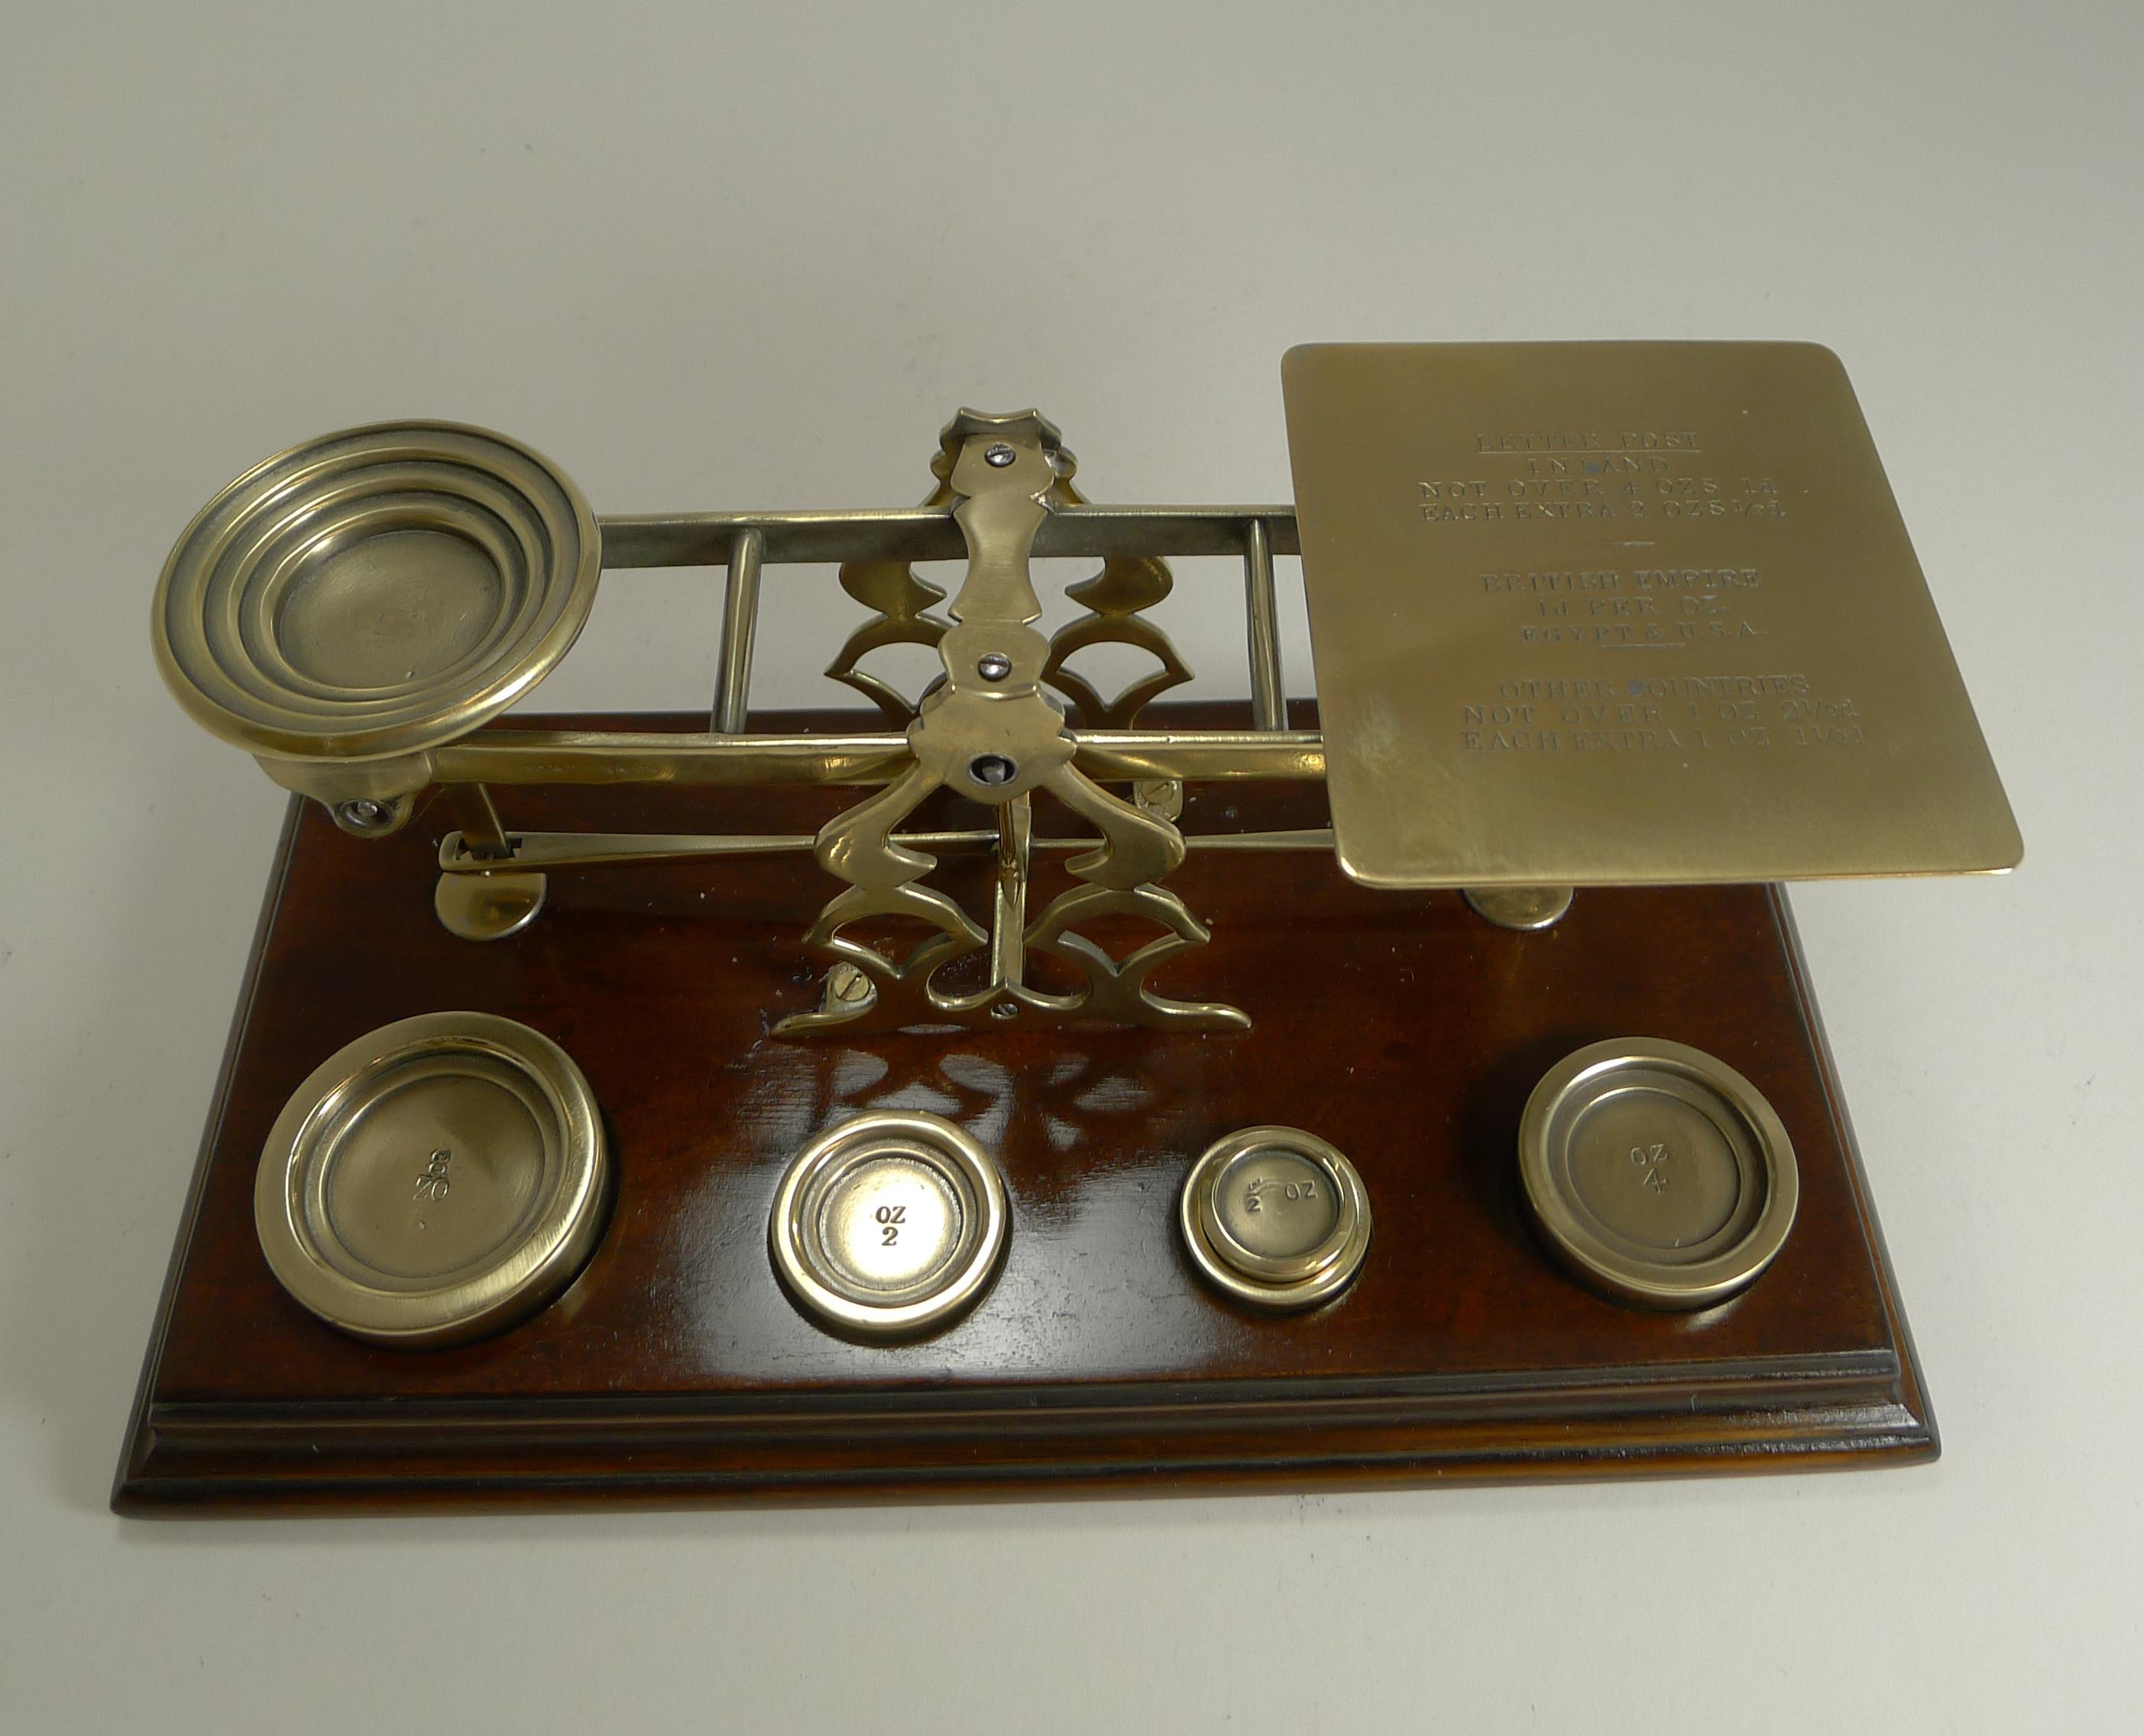 This wonderful pair of letter scales are by the very famous Sampson Mordan, the most highly sought-after maker, signed on the front, S.Mordan & Co. London.

The base is made from solid Mahogany and houses the set of five solid cast weights. The